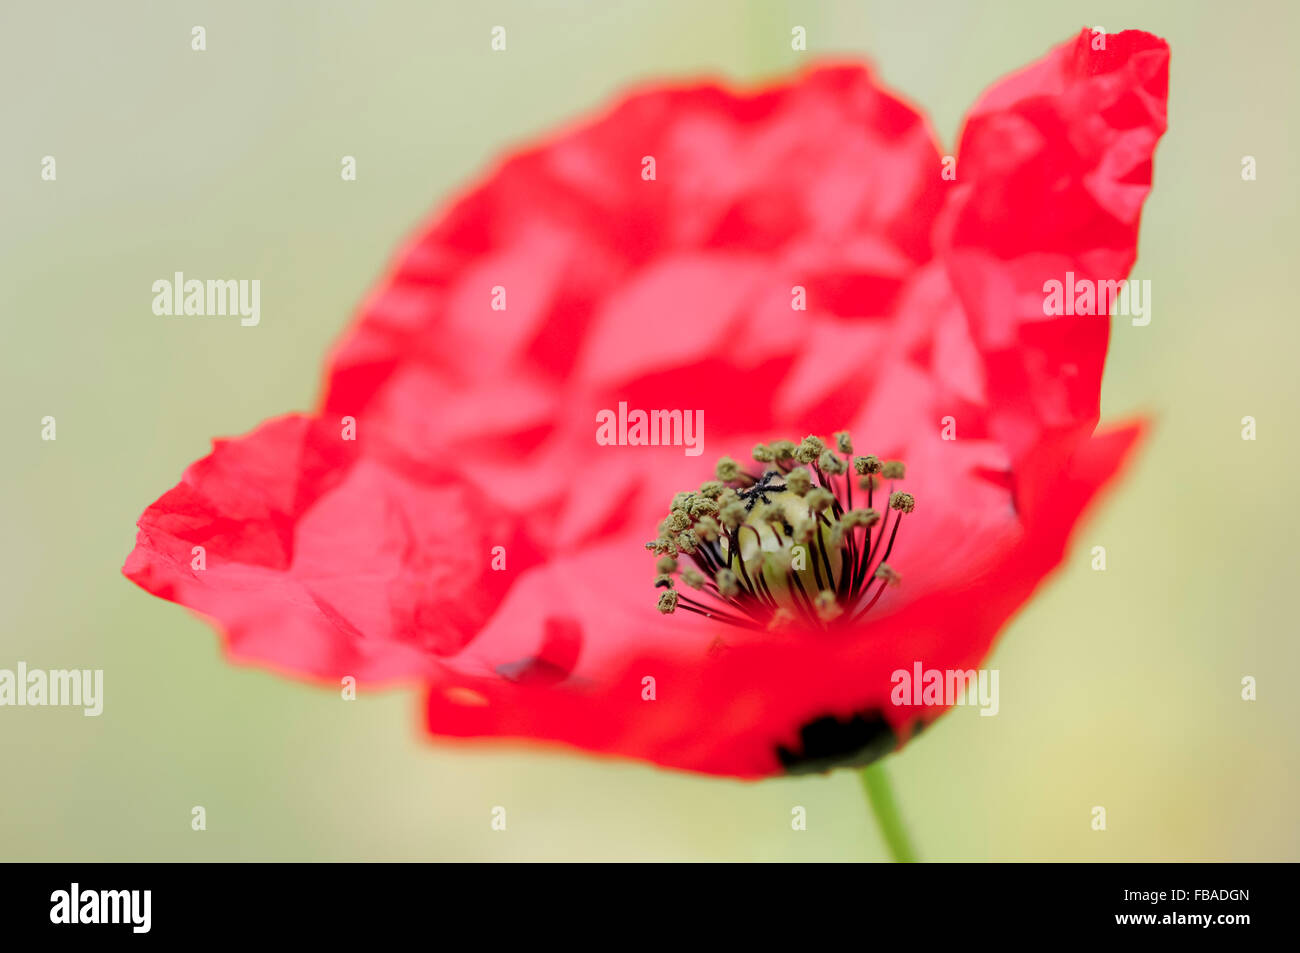 Red Poppy flower with a clear, pale background. Stock Photo